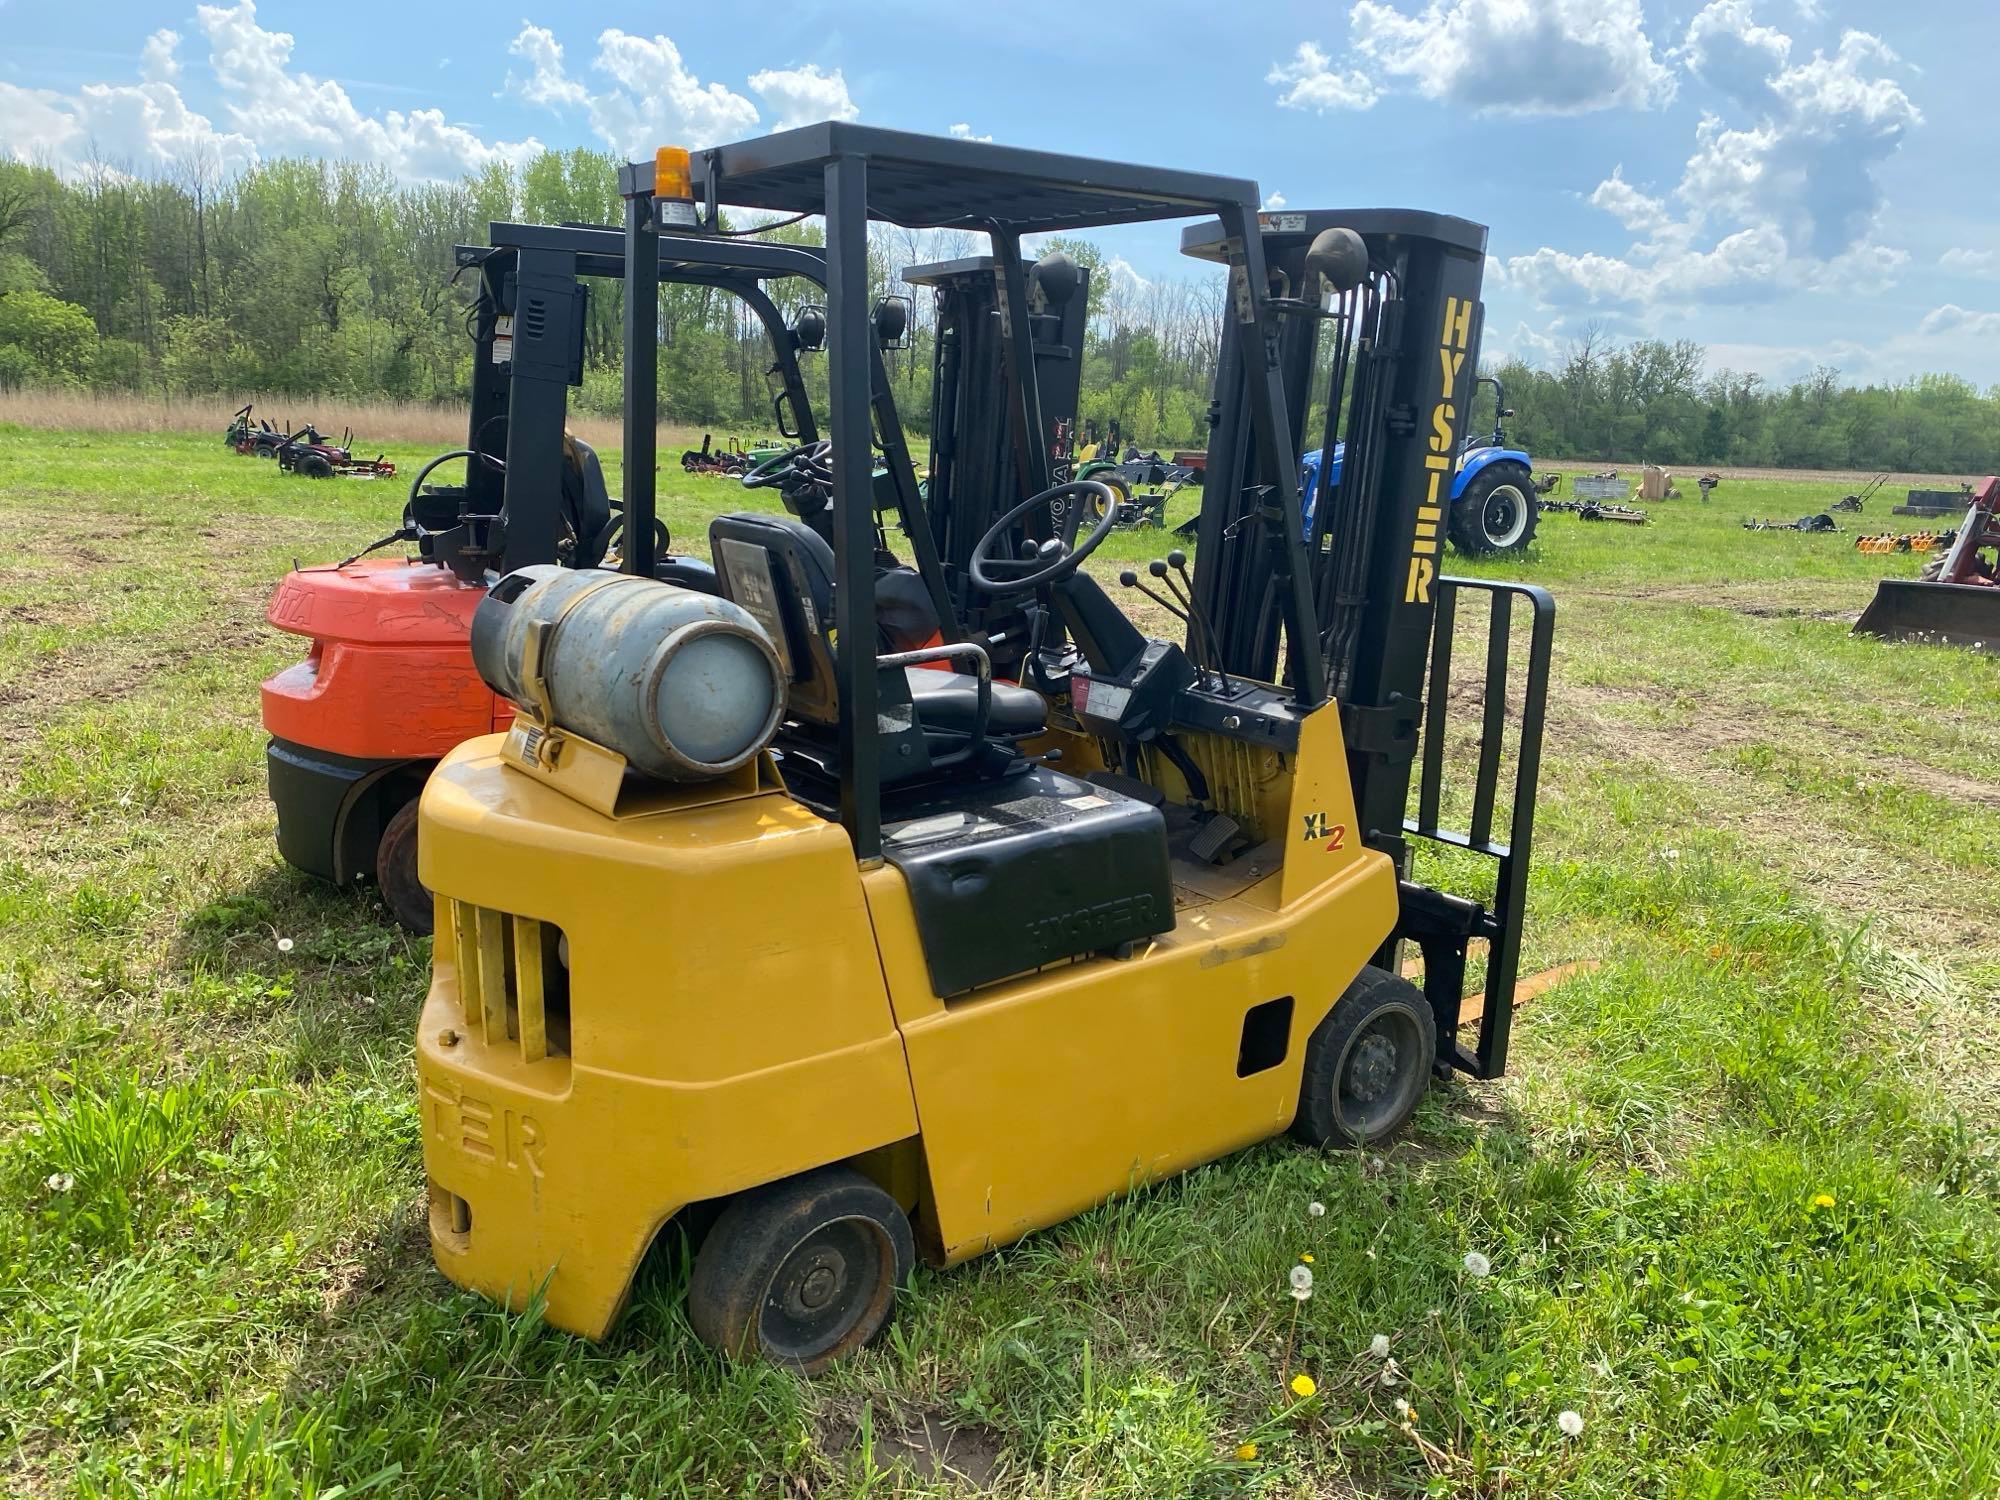 HYSTER 50XL FORKLIFT SN-97591 powered by LP engine, equipped with OROPS, 5,000lb lift capacity,